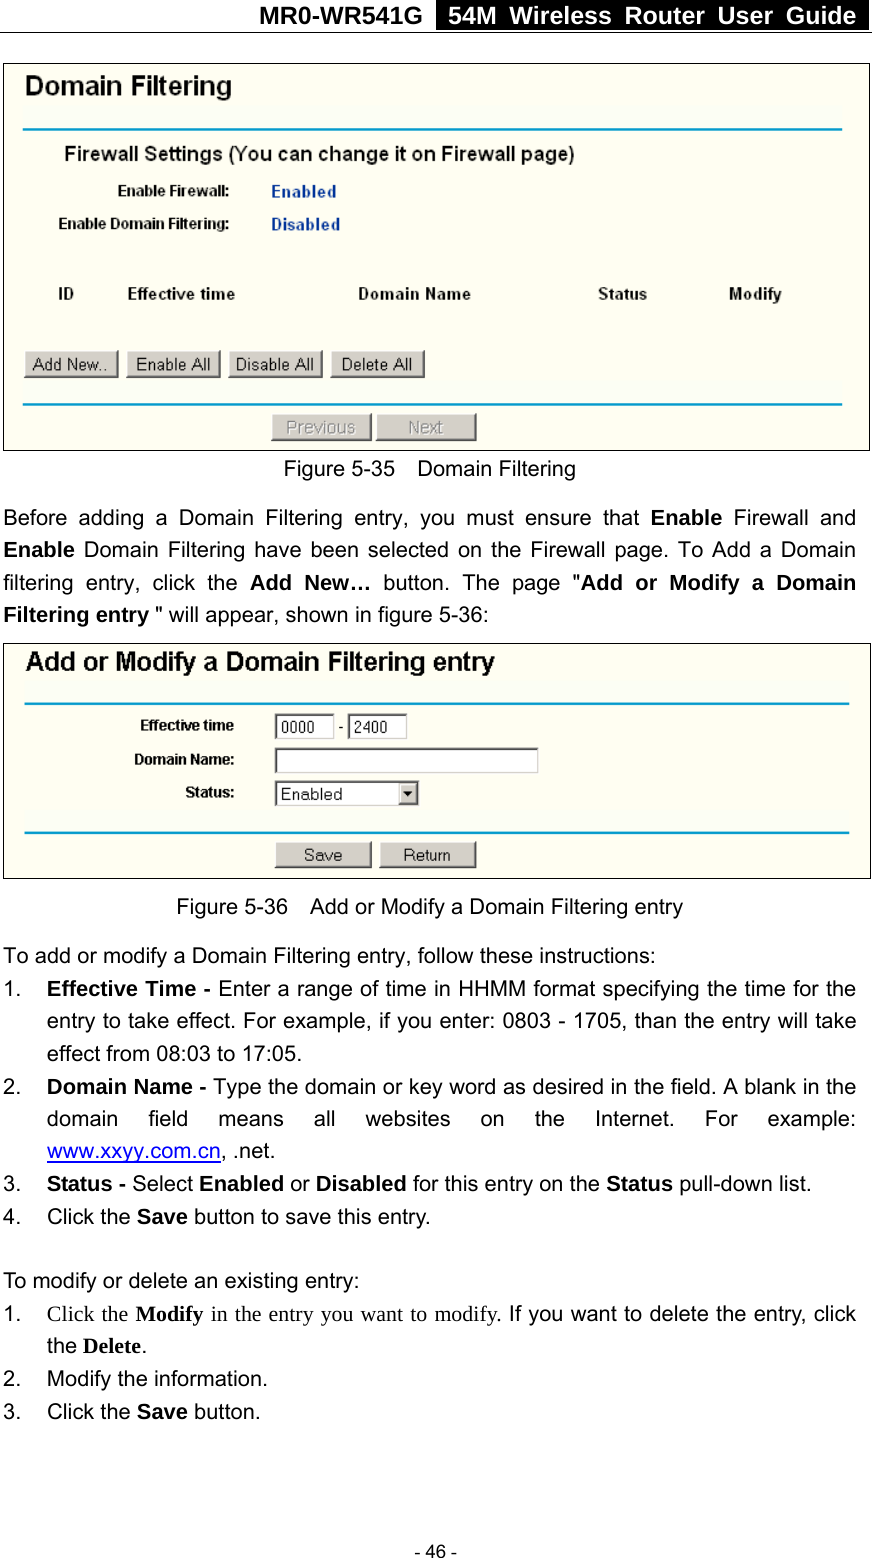 MR0-WR541G   54M Wireless Router User Guide   Figure 5-35  Domain Filtering Before adding a Domain Filtering entry, you must ensure that Enable Firewall and Enable Domain Filtering have been selected on the Firewall page. To Add a Domain filtering entry, click the Add New… button. The page &quot;Add or Modify a Domain Filtering entry &quot; will appear, shown in figure 5-36:  Figure 5-36    Add or Modify a Domain Filtering entry To add or modify a Domain Filtering entry, follow these instructions: 1.  Effective Time - Enter a range of time in HHMM format specifying the time for the entry to take effect. For example, if you enter: 0803 - 1705, than the entry will take effect from 08:03 to 17:05. 2.  Domain Name - Type the domain or key word as desired in the field. A blank in the domain field means all websites on the Internet. For example: www.xxyy.com.cn, .net. 3.  Status - Select Enabled or Disabled for this entry on the Status pull-down list. 4. Click the Save button to save this entry.  To modify or delete an existing entry: 1.  Click the Modify in the entry you want to modify. If you want to delete the entry, click the Delete. 2.  Modify the information.   3. Click the Save button.   - 46 - 